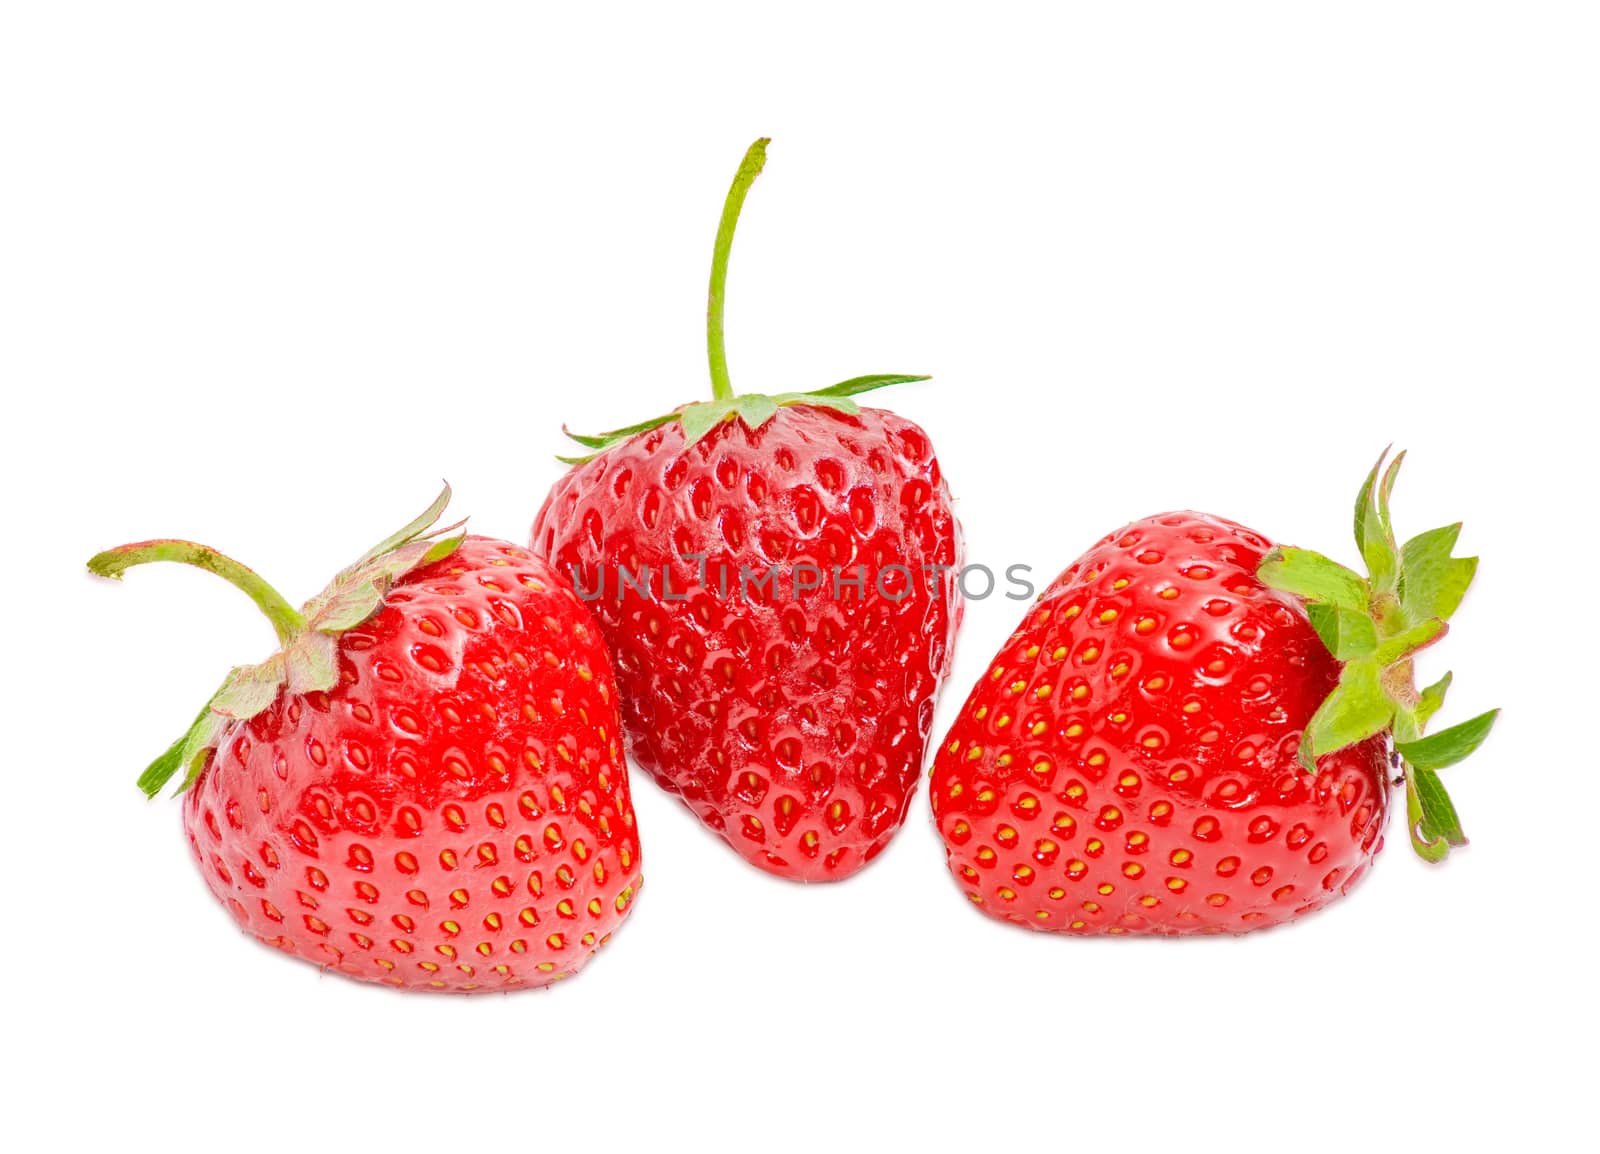 Fresh strawberries closeup on a light background by anmbph